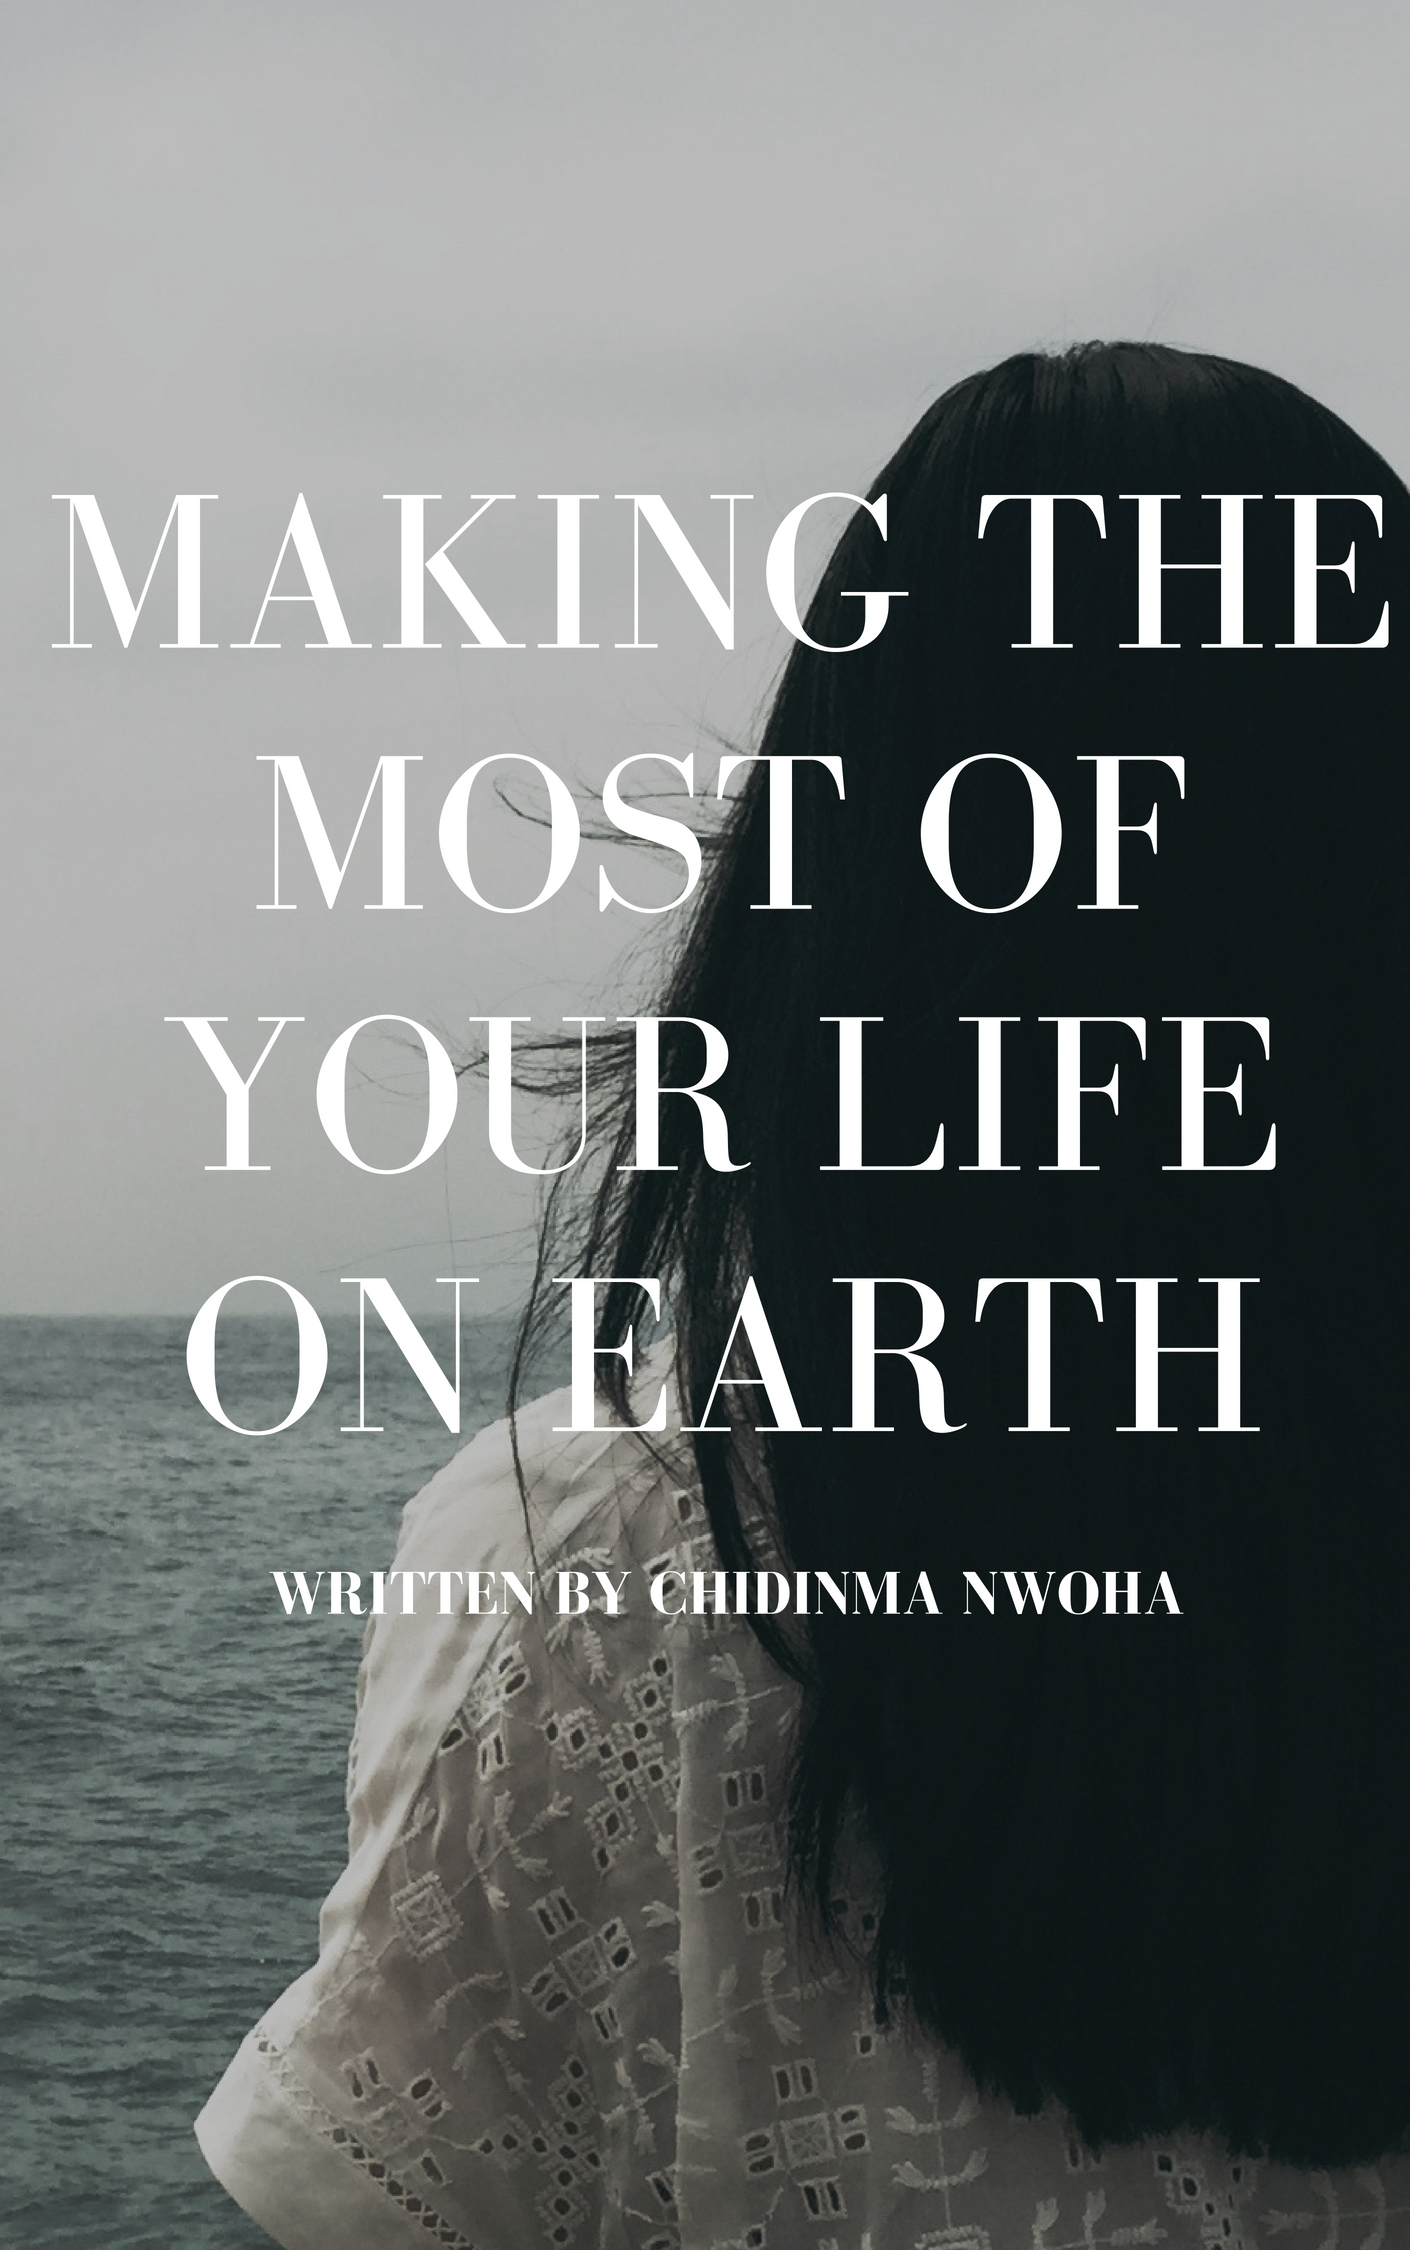 Making the most of your life on earth